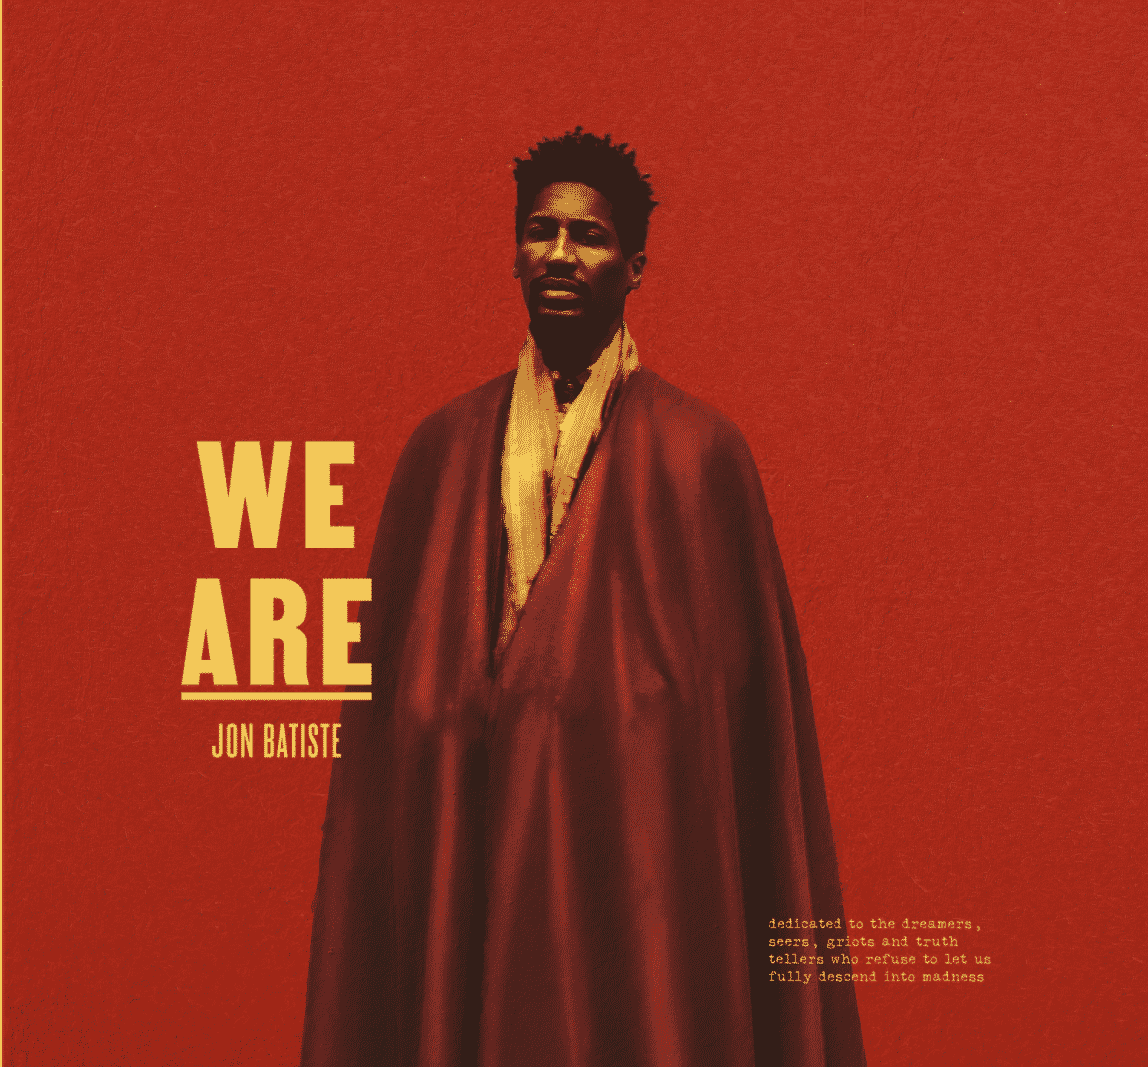 Album Review: ‘We Are’ by Jon Batiste is Moving as well as Meaningful